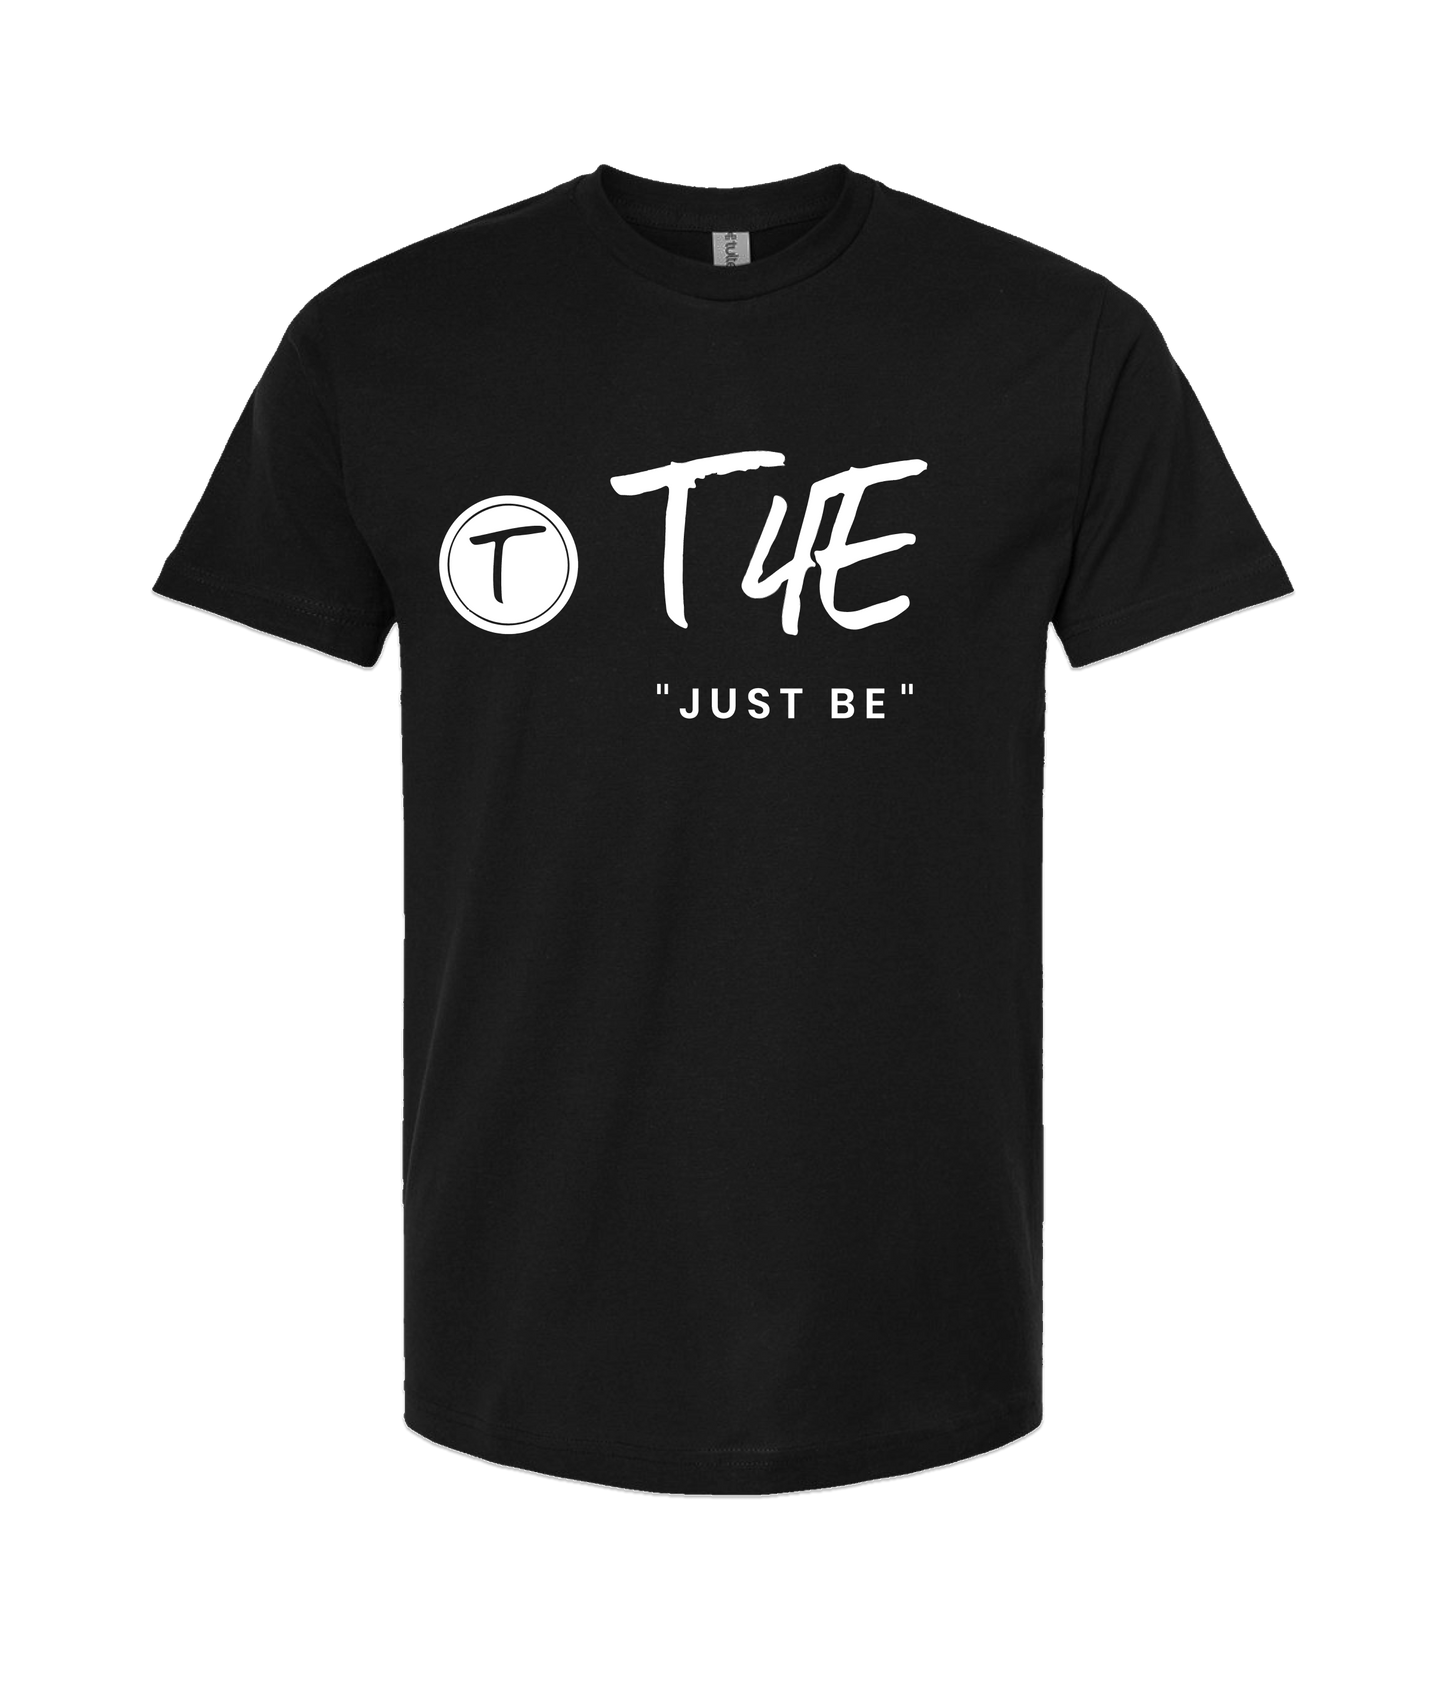 T4E (Trans4ormed Extreme) - JUST BE - Black T-Shirt